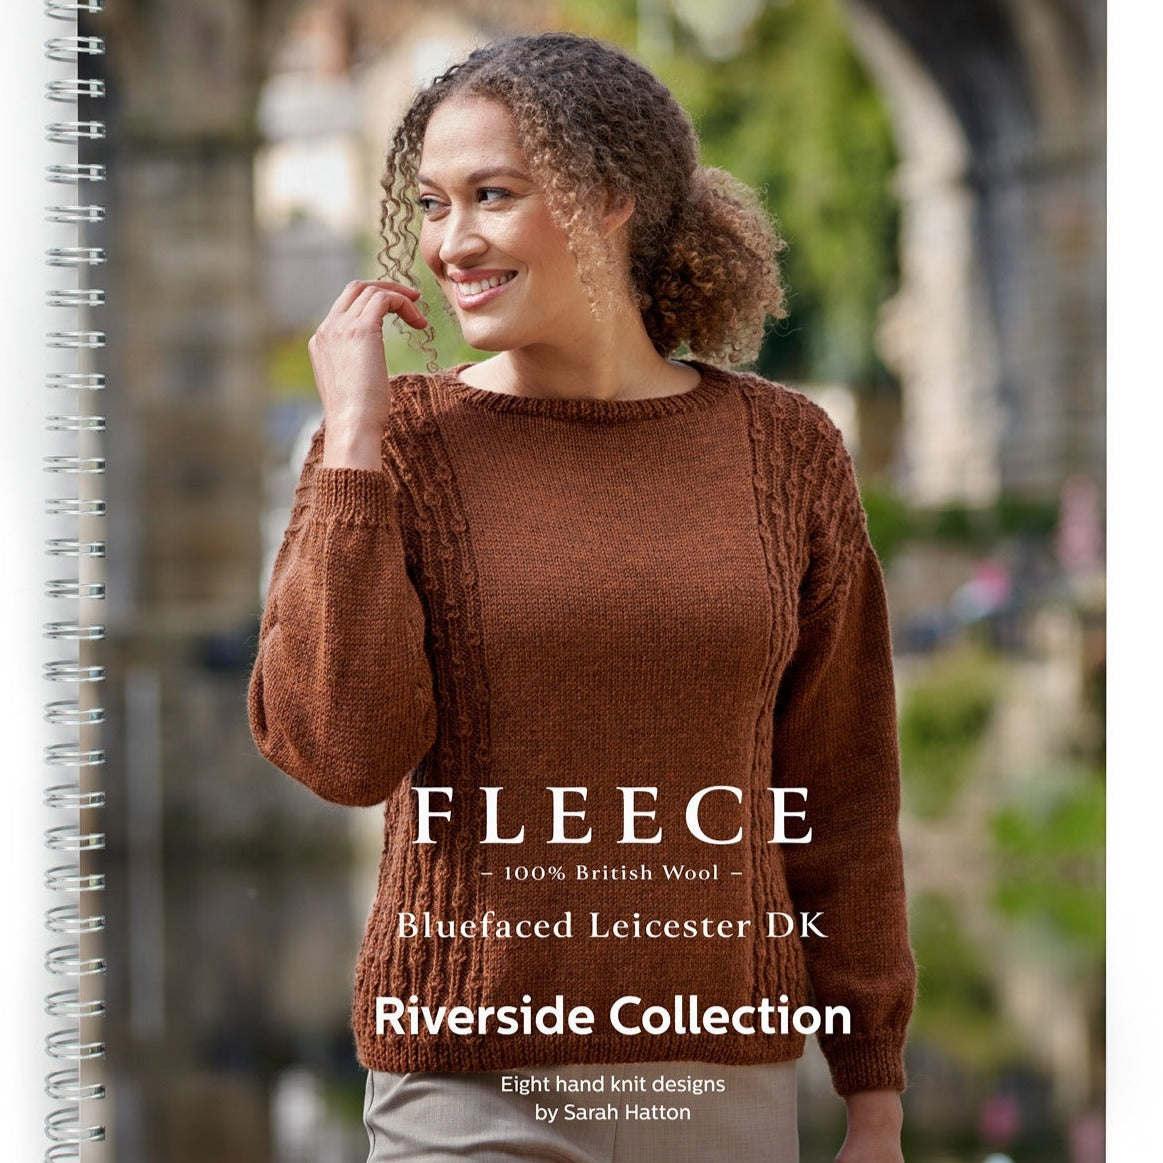 Fleece Bluefaced Leicester DK - Riverside Collection by West Yorkshire Spinners